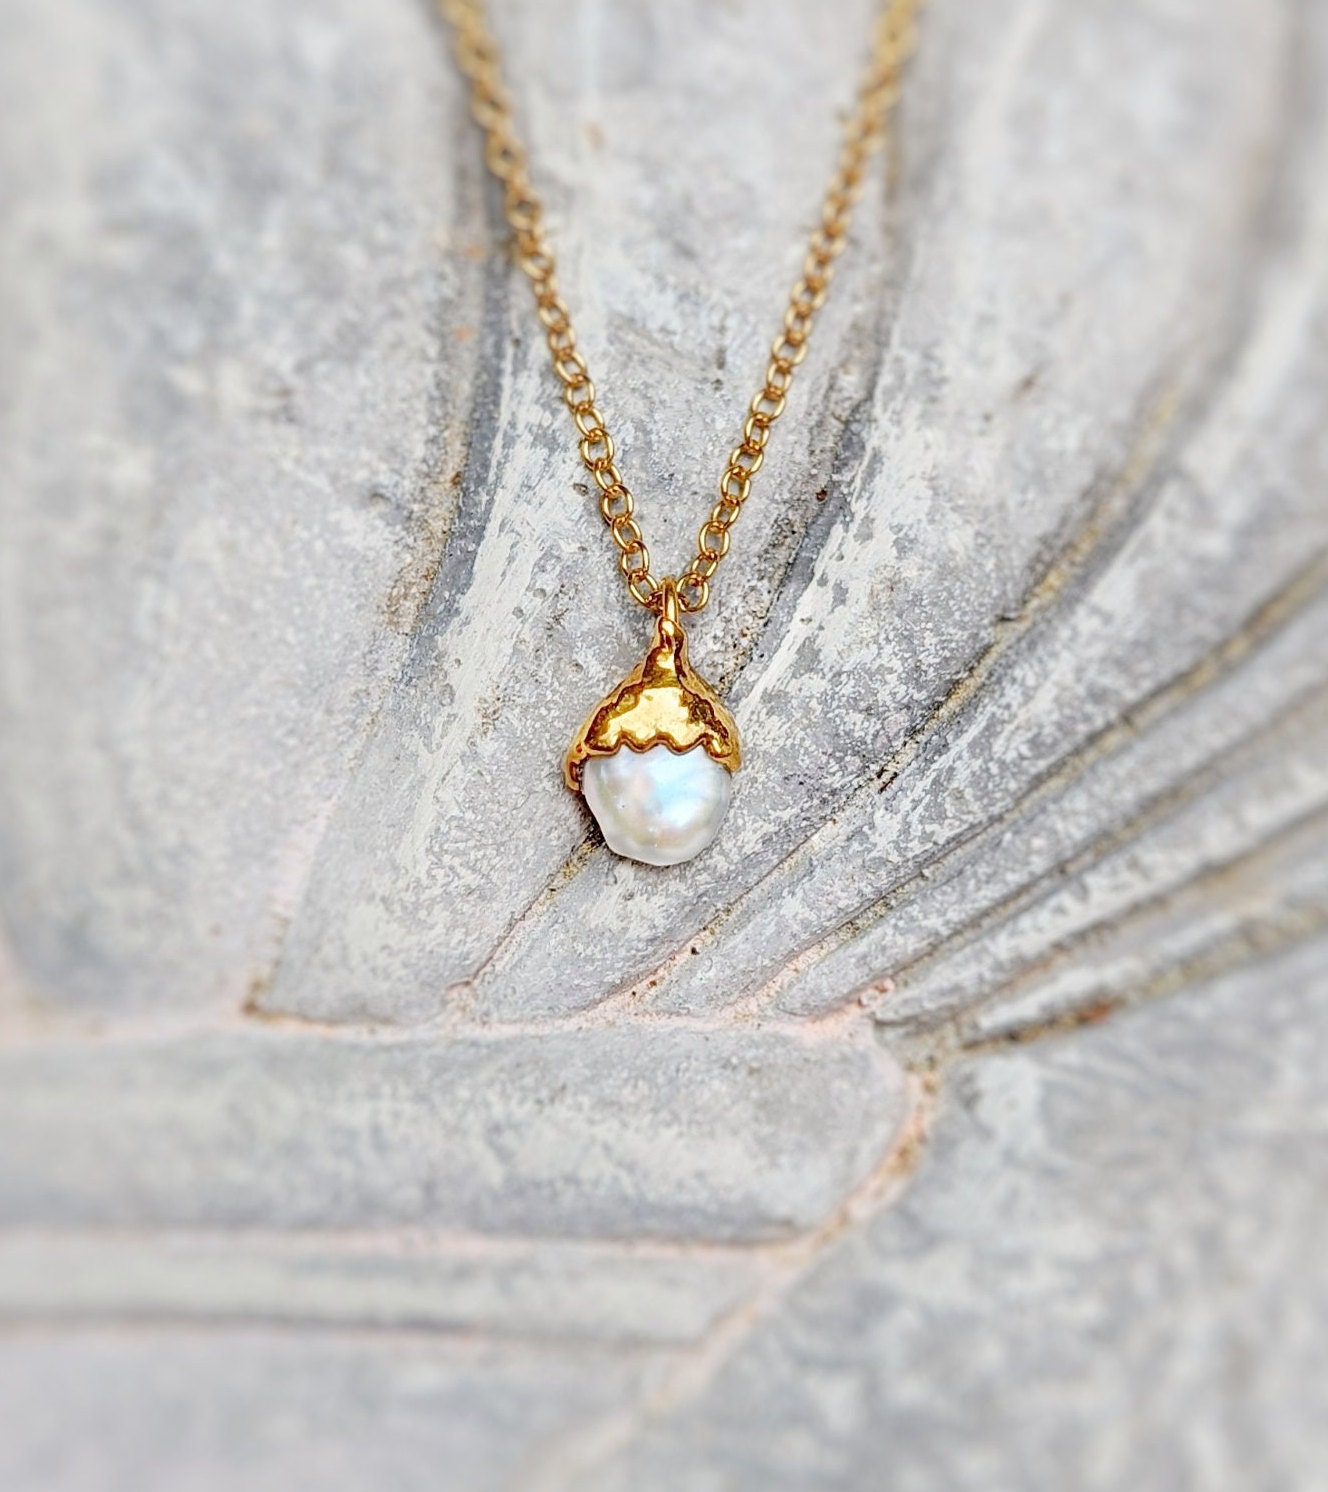 Small dainty Freshwater Pearl necklace in unique 18k Gold setting